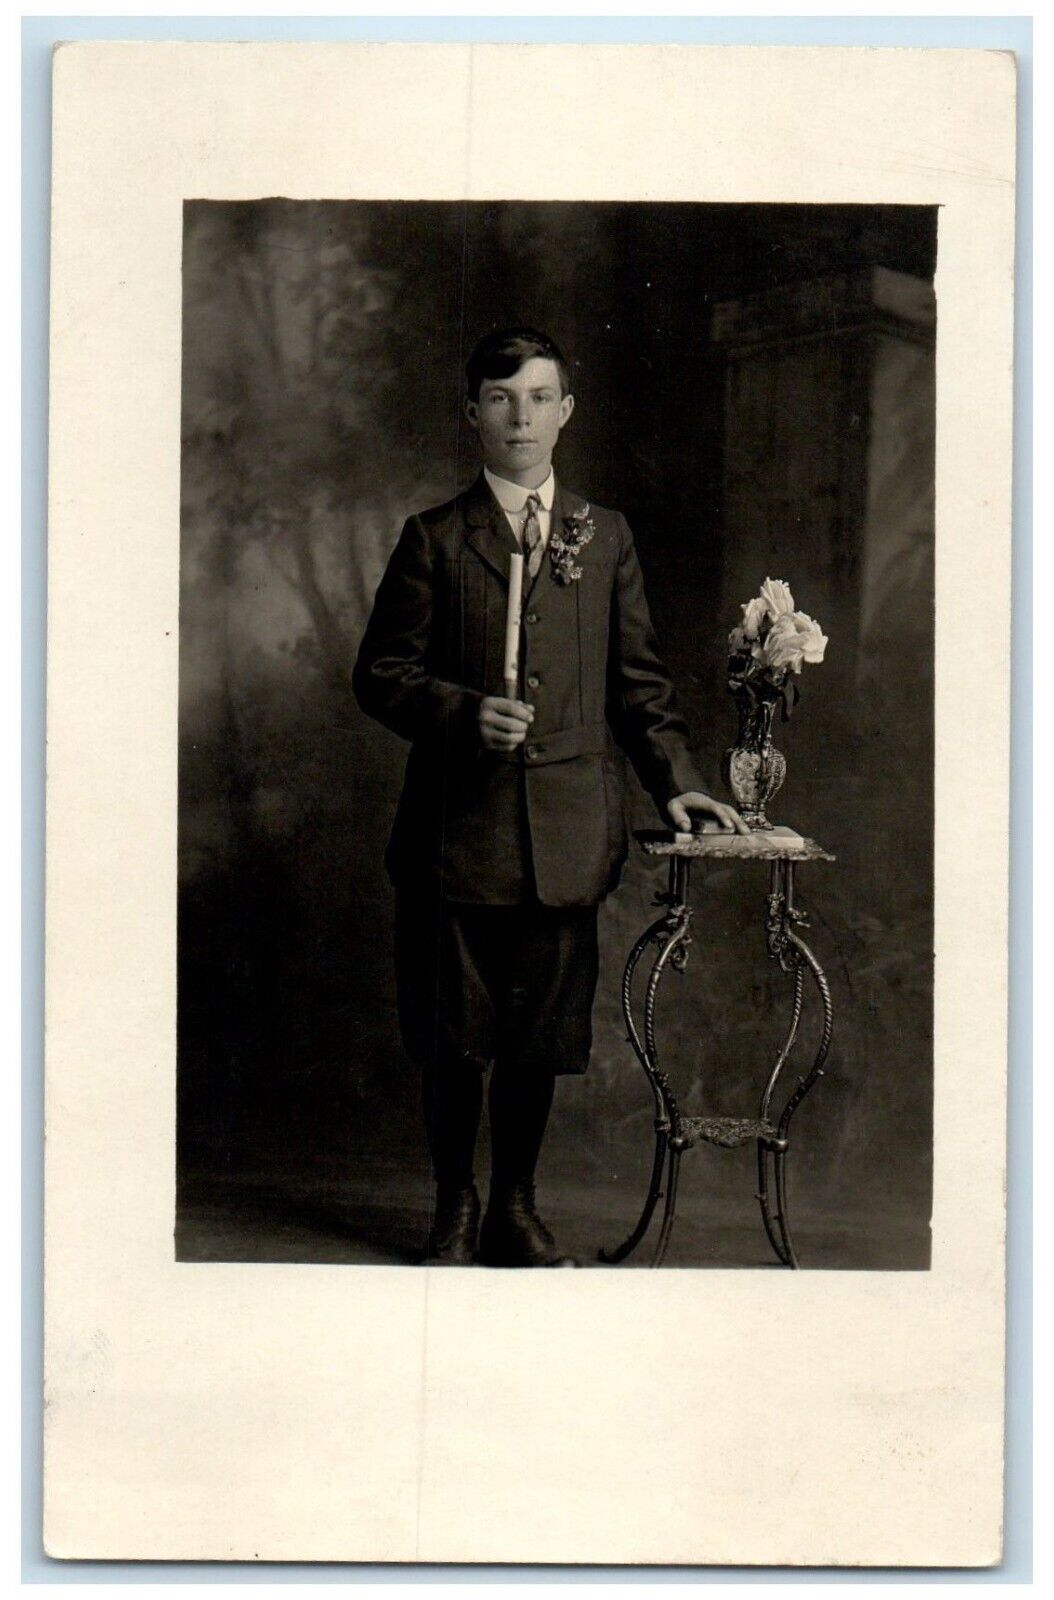 Boy With Candle Studio Christian Confirmation Religious RPPC Photo Postcard